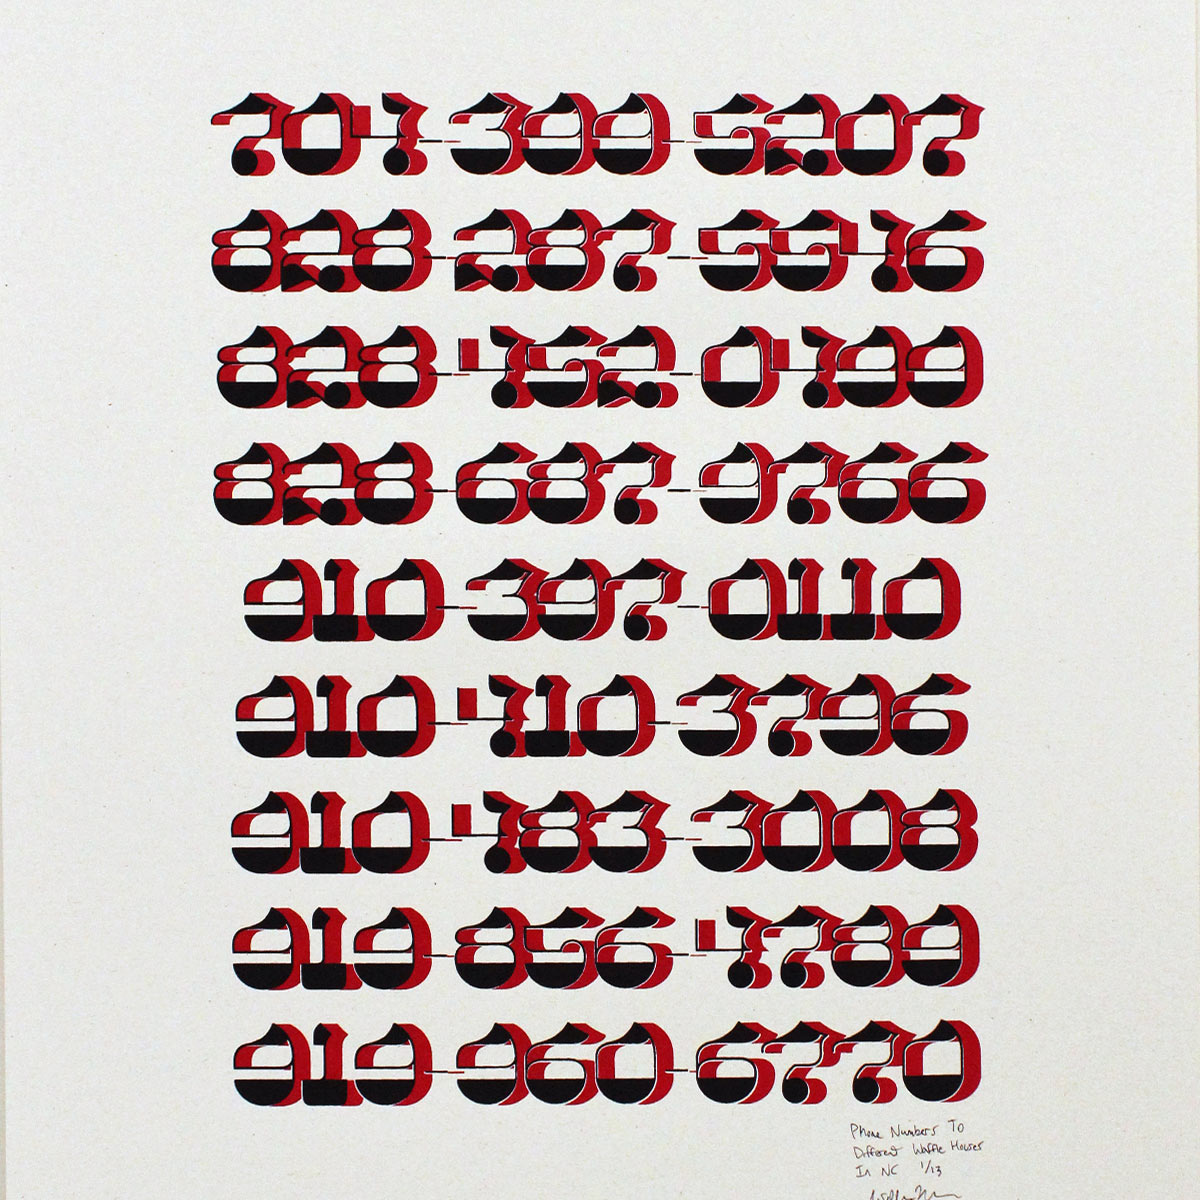 Screen printed poster of phone numbers to show typeface in context